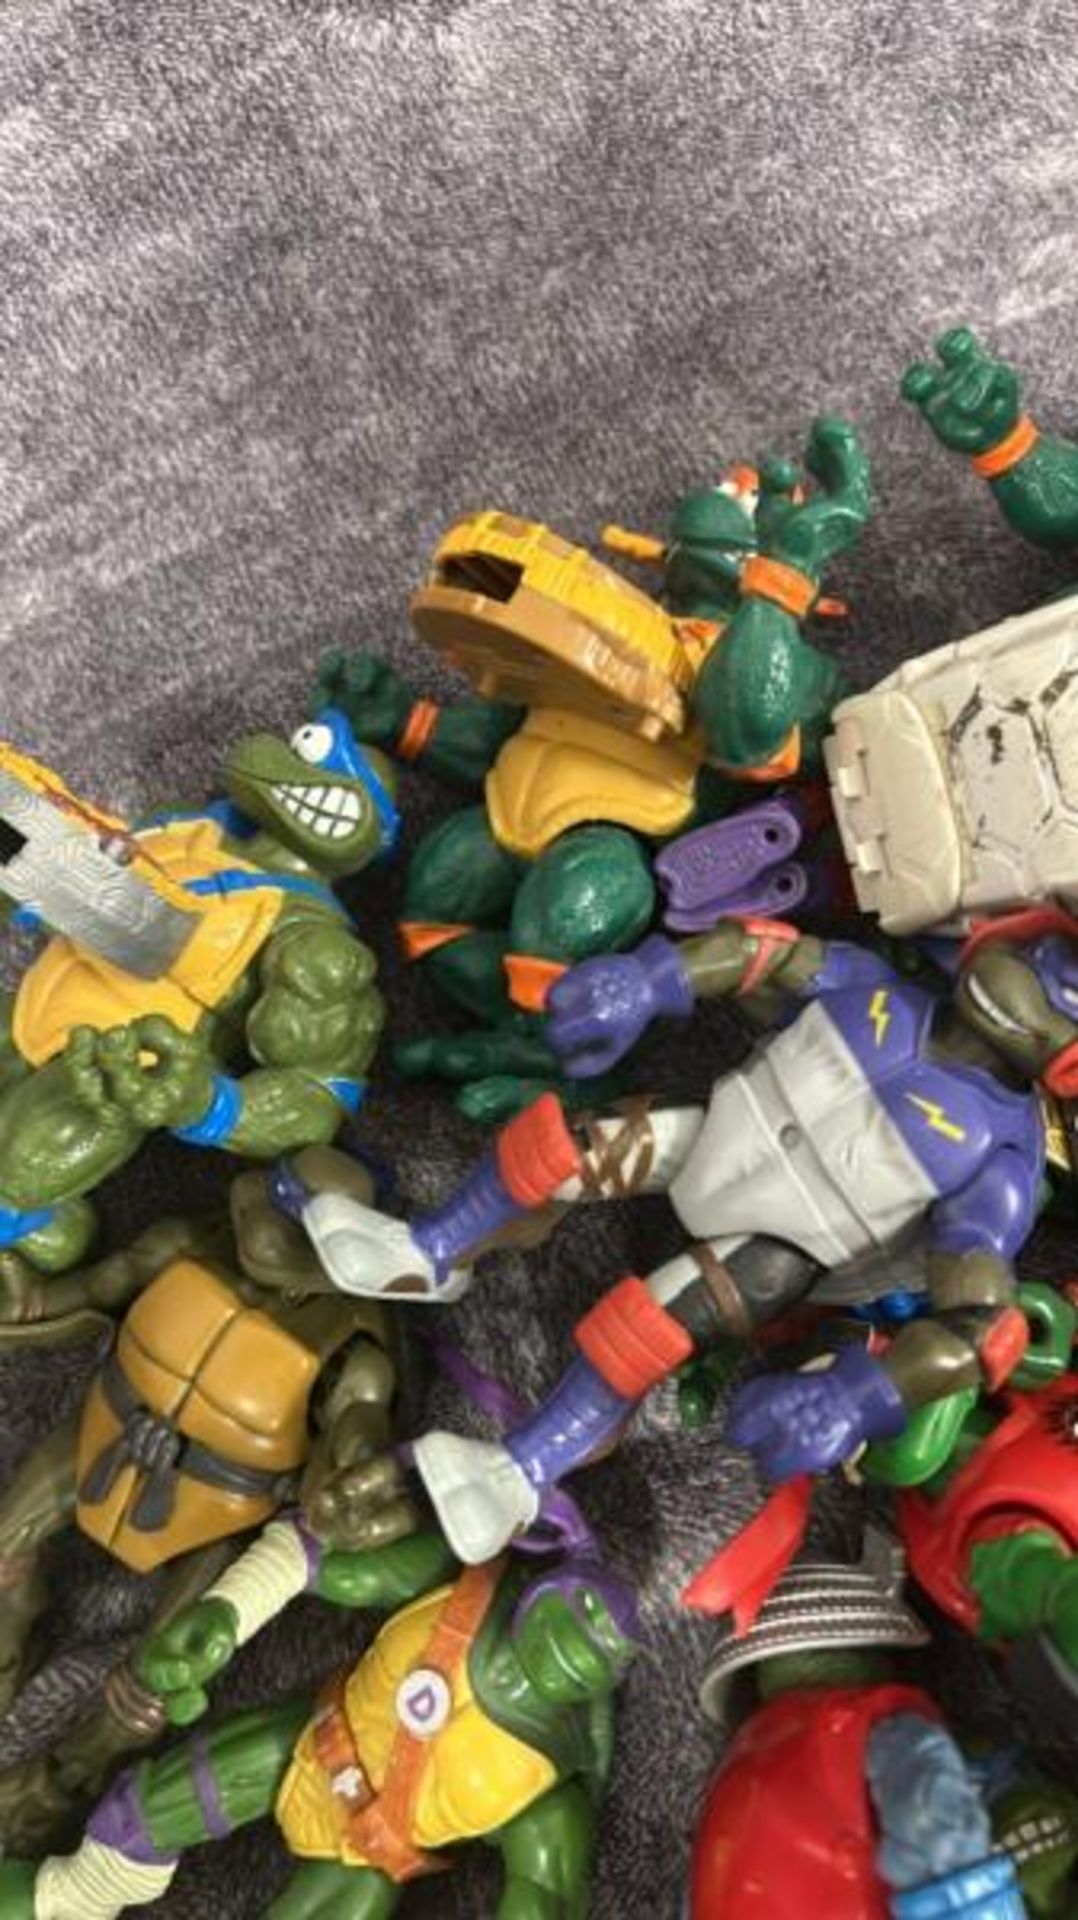 Teenage Mutant Ninja Turtles - Assorted loose figures including some based on the movie versions and - Image 10 of 13